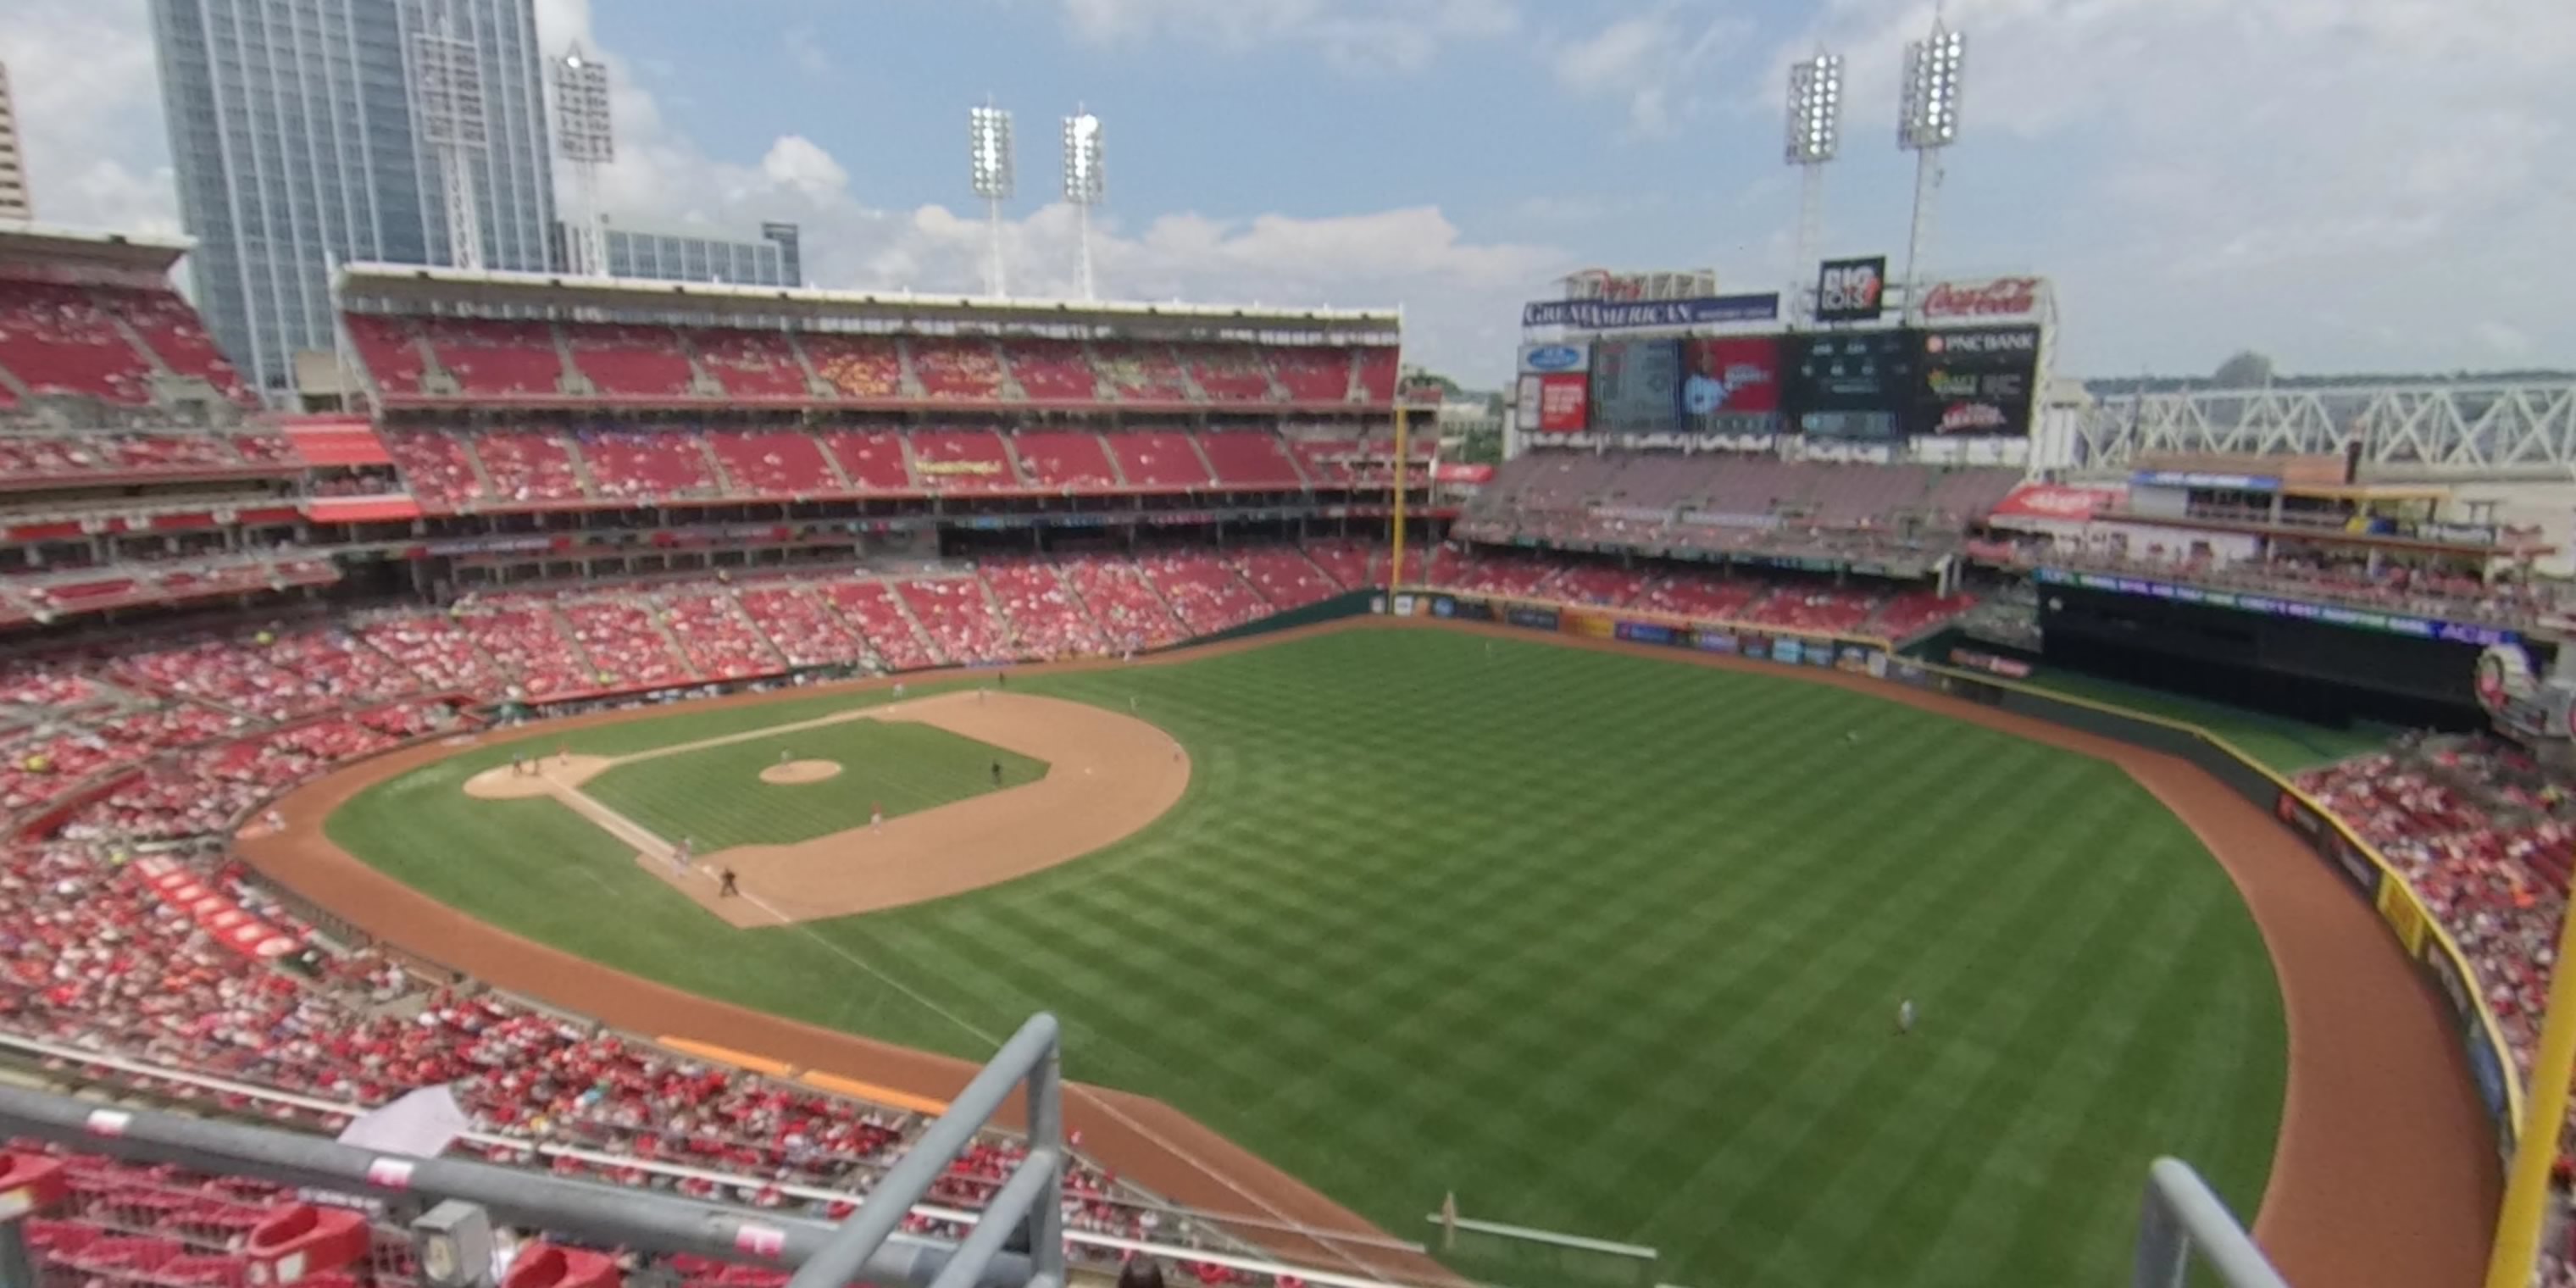 section 436 panoramic seat view  for baseball - great american ball park